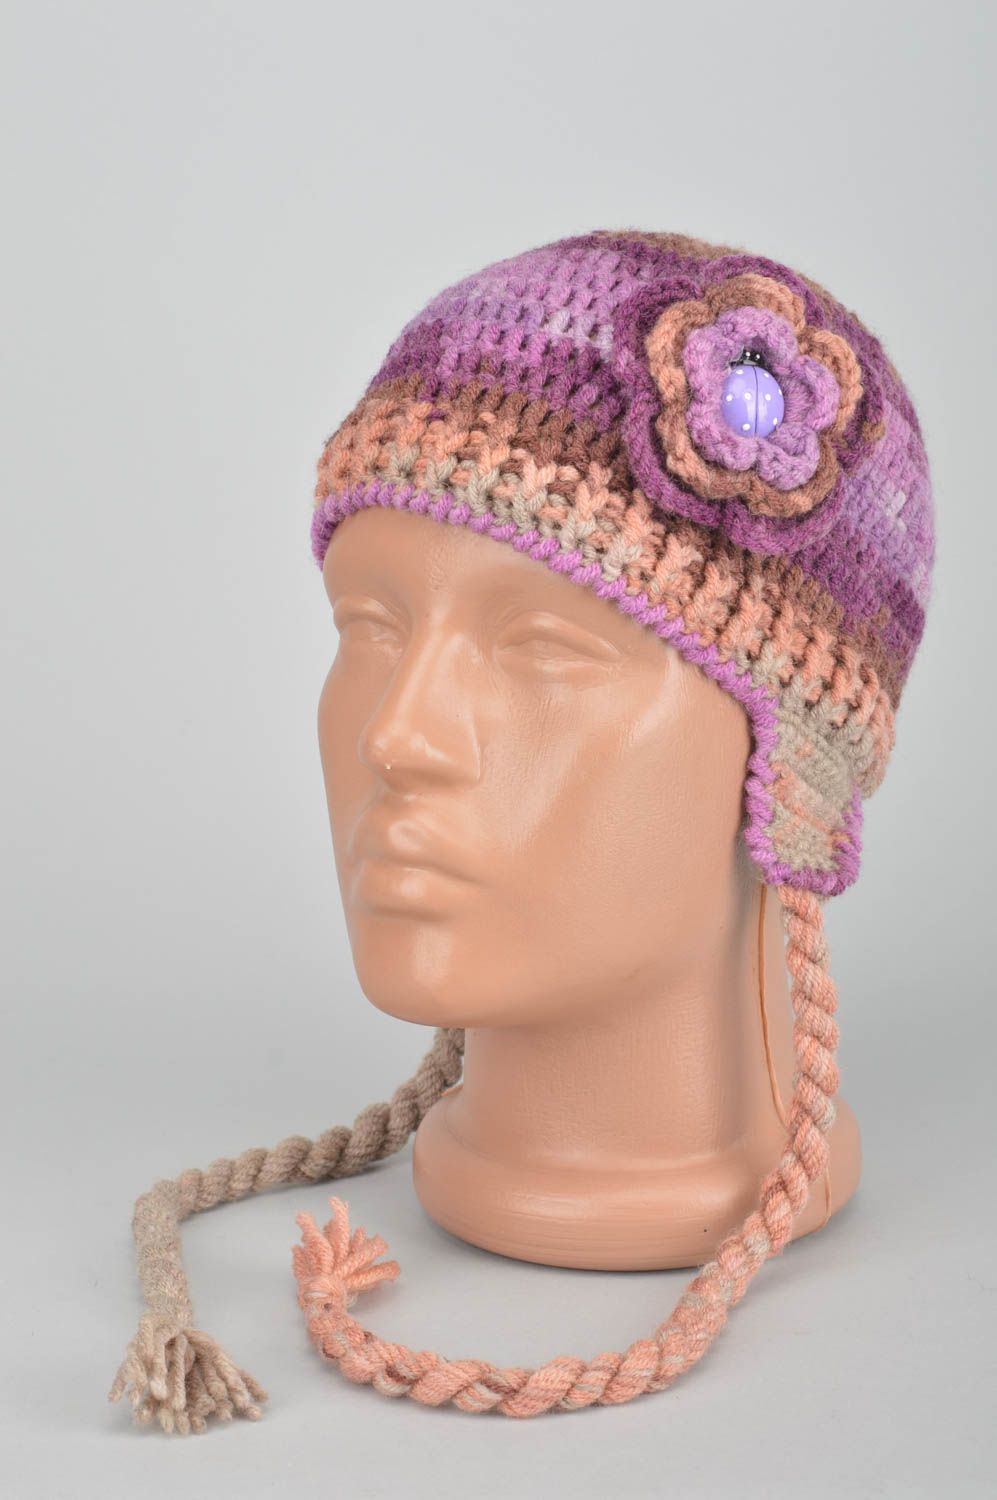 Beautiful handmade knitted hat knit hat designs accessories for girls photo 1